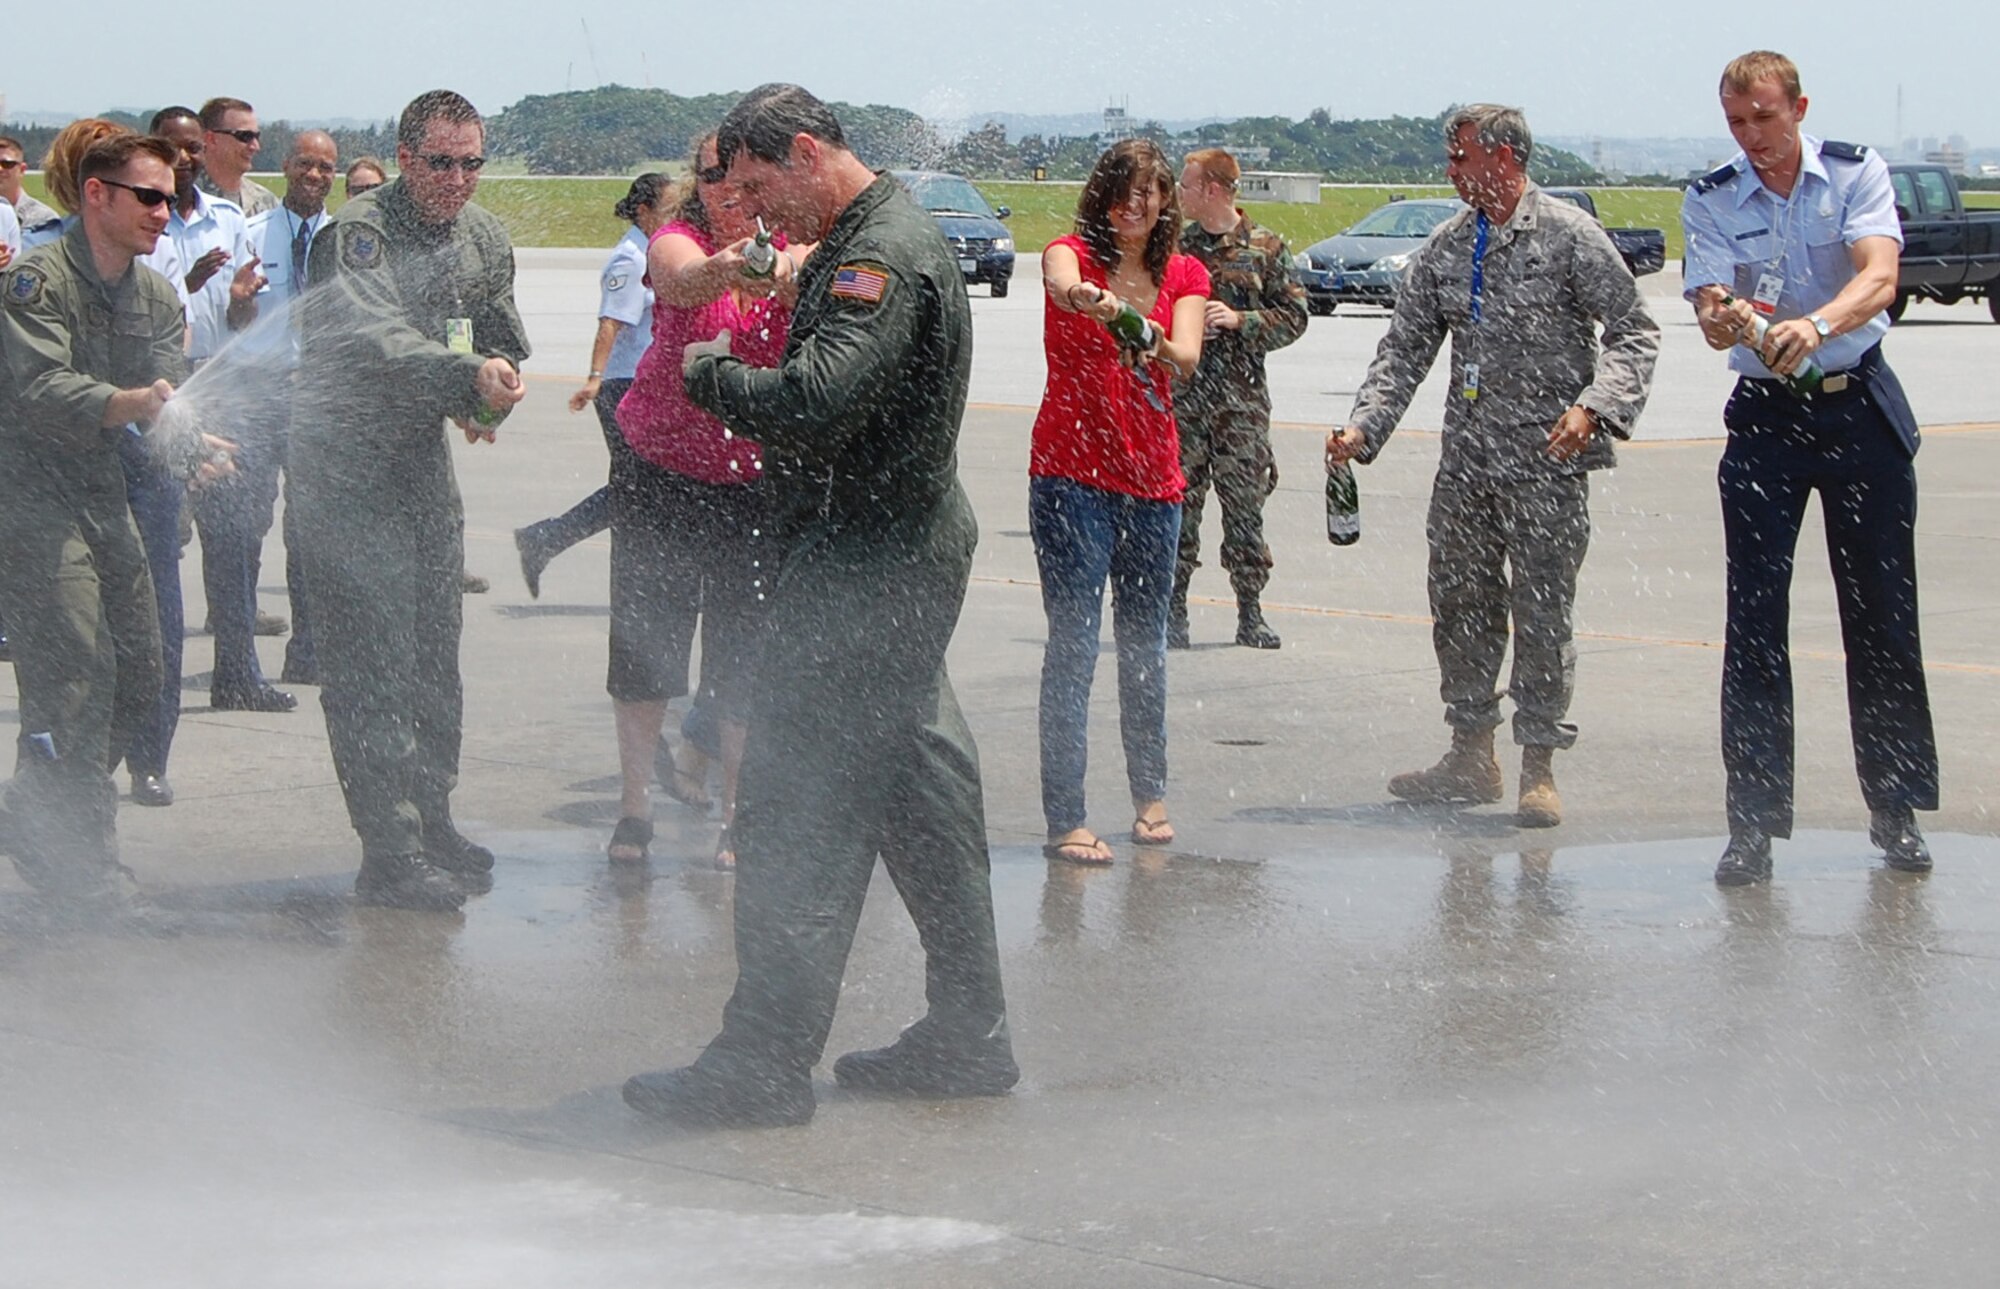 KADENA AIR BASE, Japan -- Col. David Mullins, the 353rd Special Operations Group commander, is sprayed down by members of the group and his family here June 1 after his final flight before moving on to his next assignment. The colonel flew in both a MC-130H Combat Talon II and MC-130P Combat Shadow for his final flight. (U.S. Air Force photo by James D'Angina) 